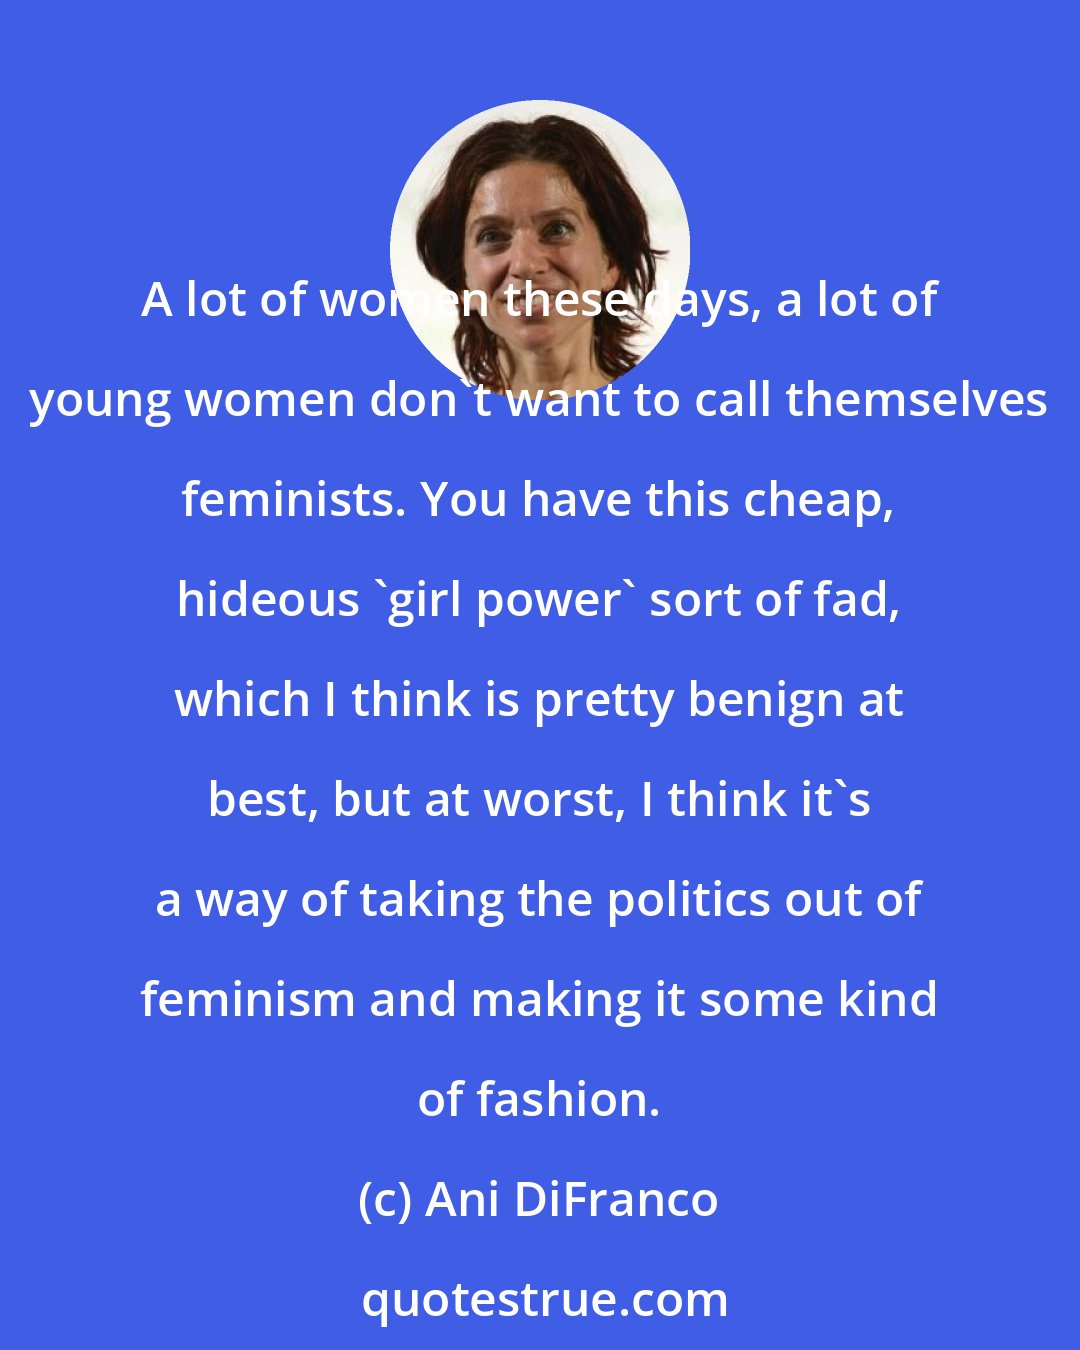 Ani DiFranco: A lot of women these days, a lot of young women don't want to call themselves feminists. You have this cheap, hideous 'girl power' sort of fad, which I think is pretty benign at best, but at worst, I think it's a way of taking the politics out of feminism and making it some kind of fashion.